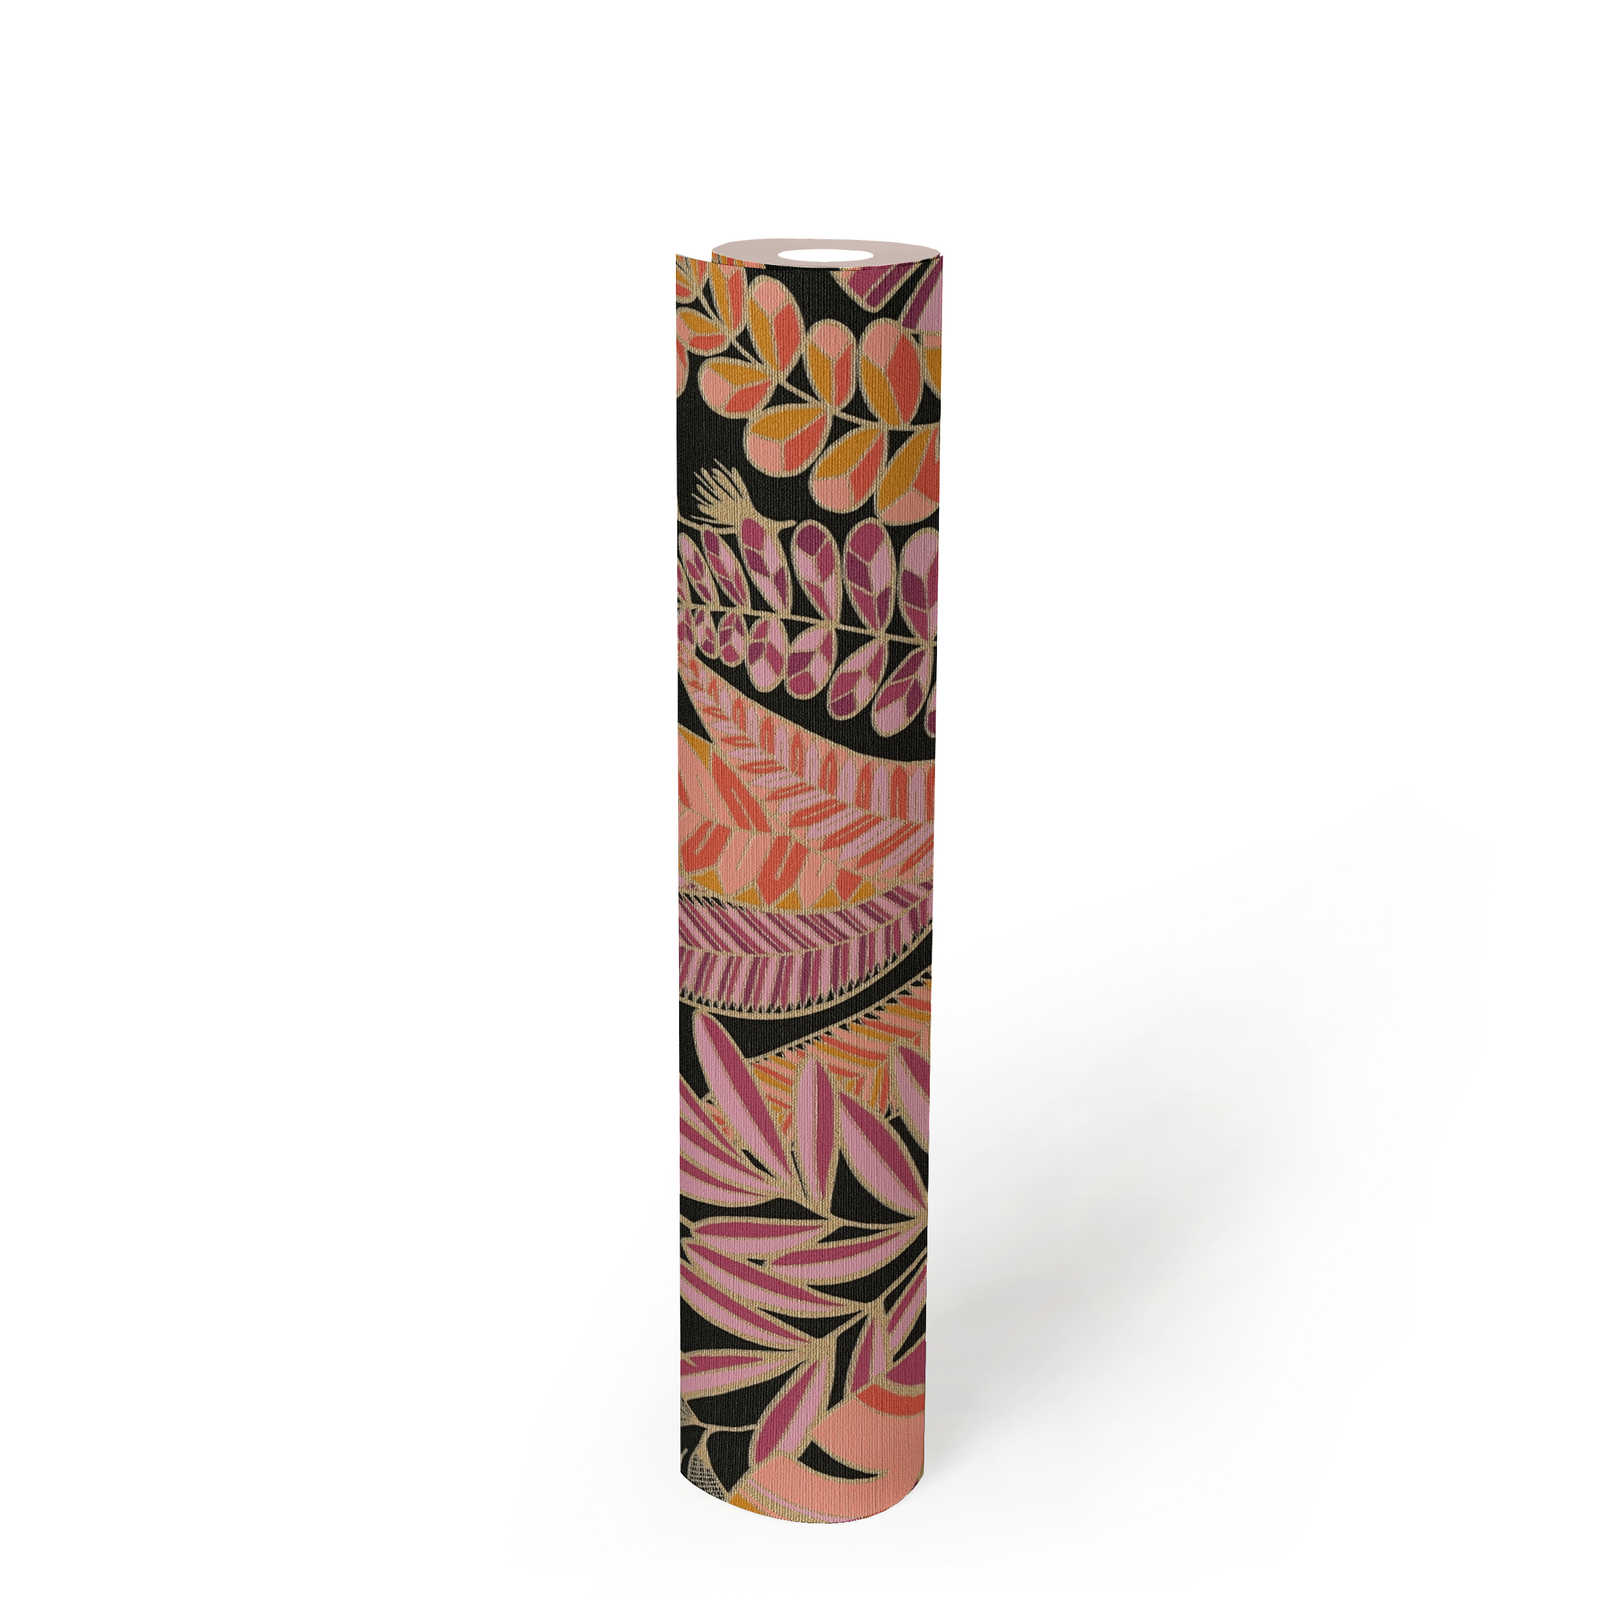             Non-woven wallpaper in eye-catching style with large leaves - black, pink, orange
        